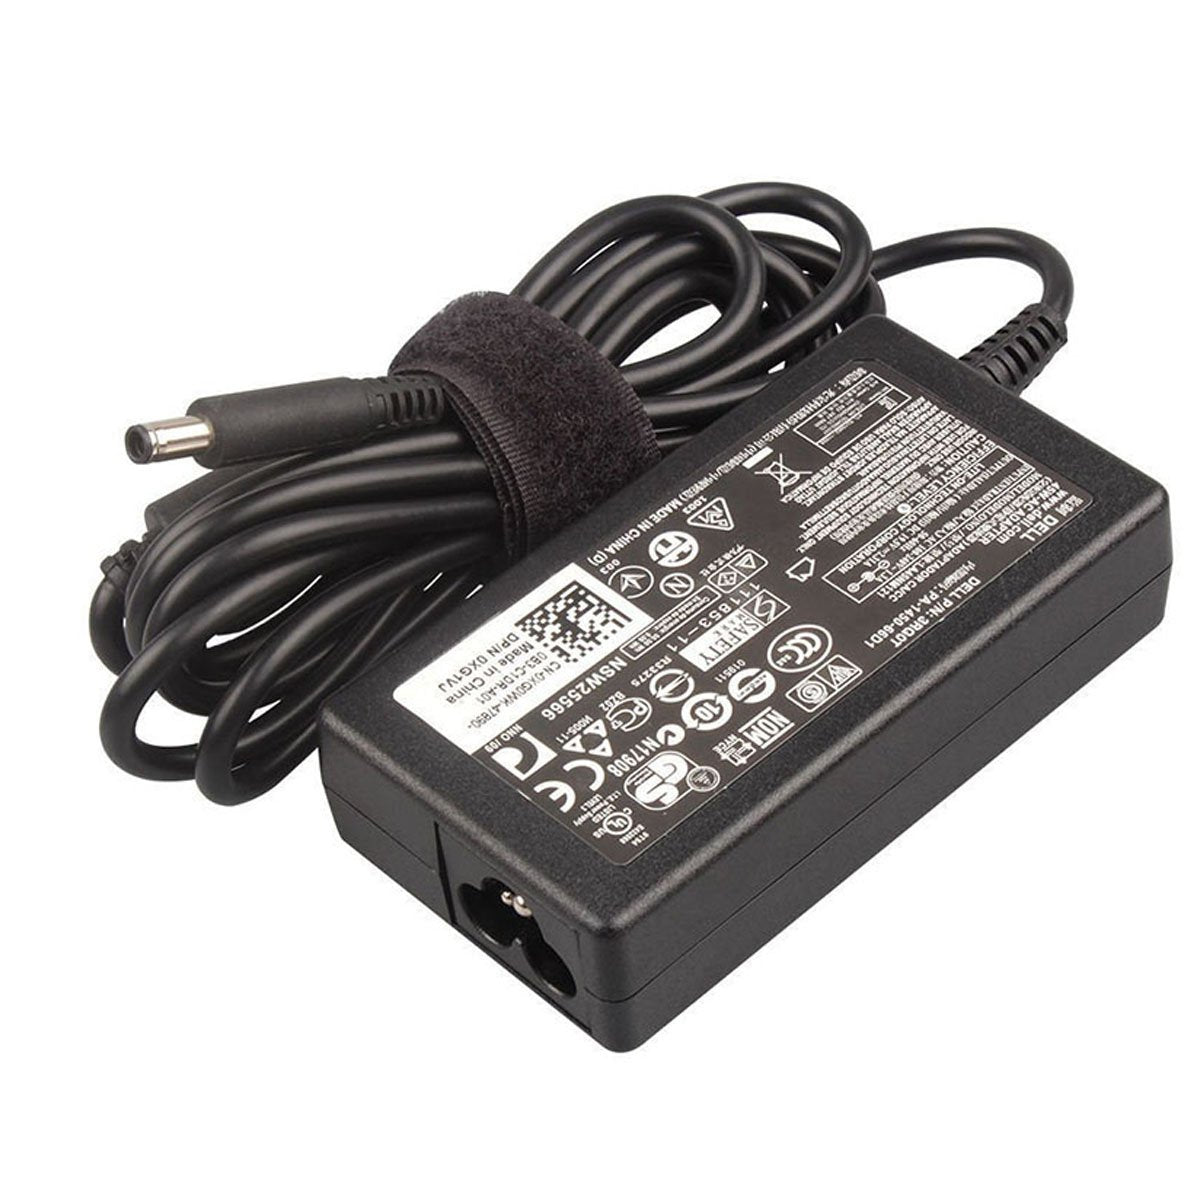 Dell XPS 13 L322X Original 45W Laptop Charger Adapter With Power Cord 19.5V 4.5mm Pin